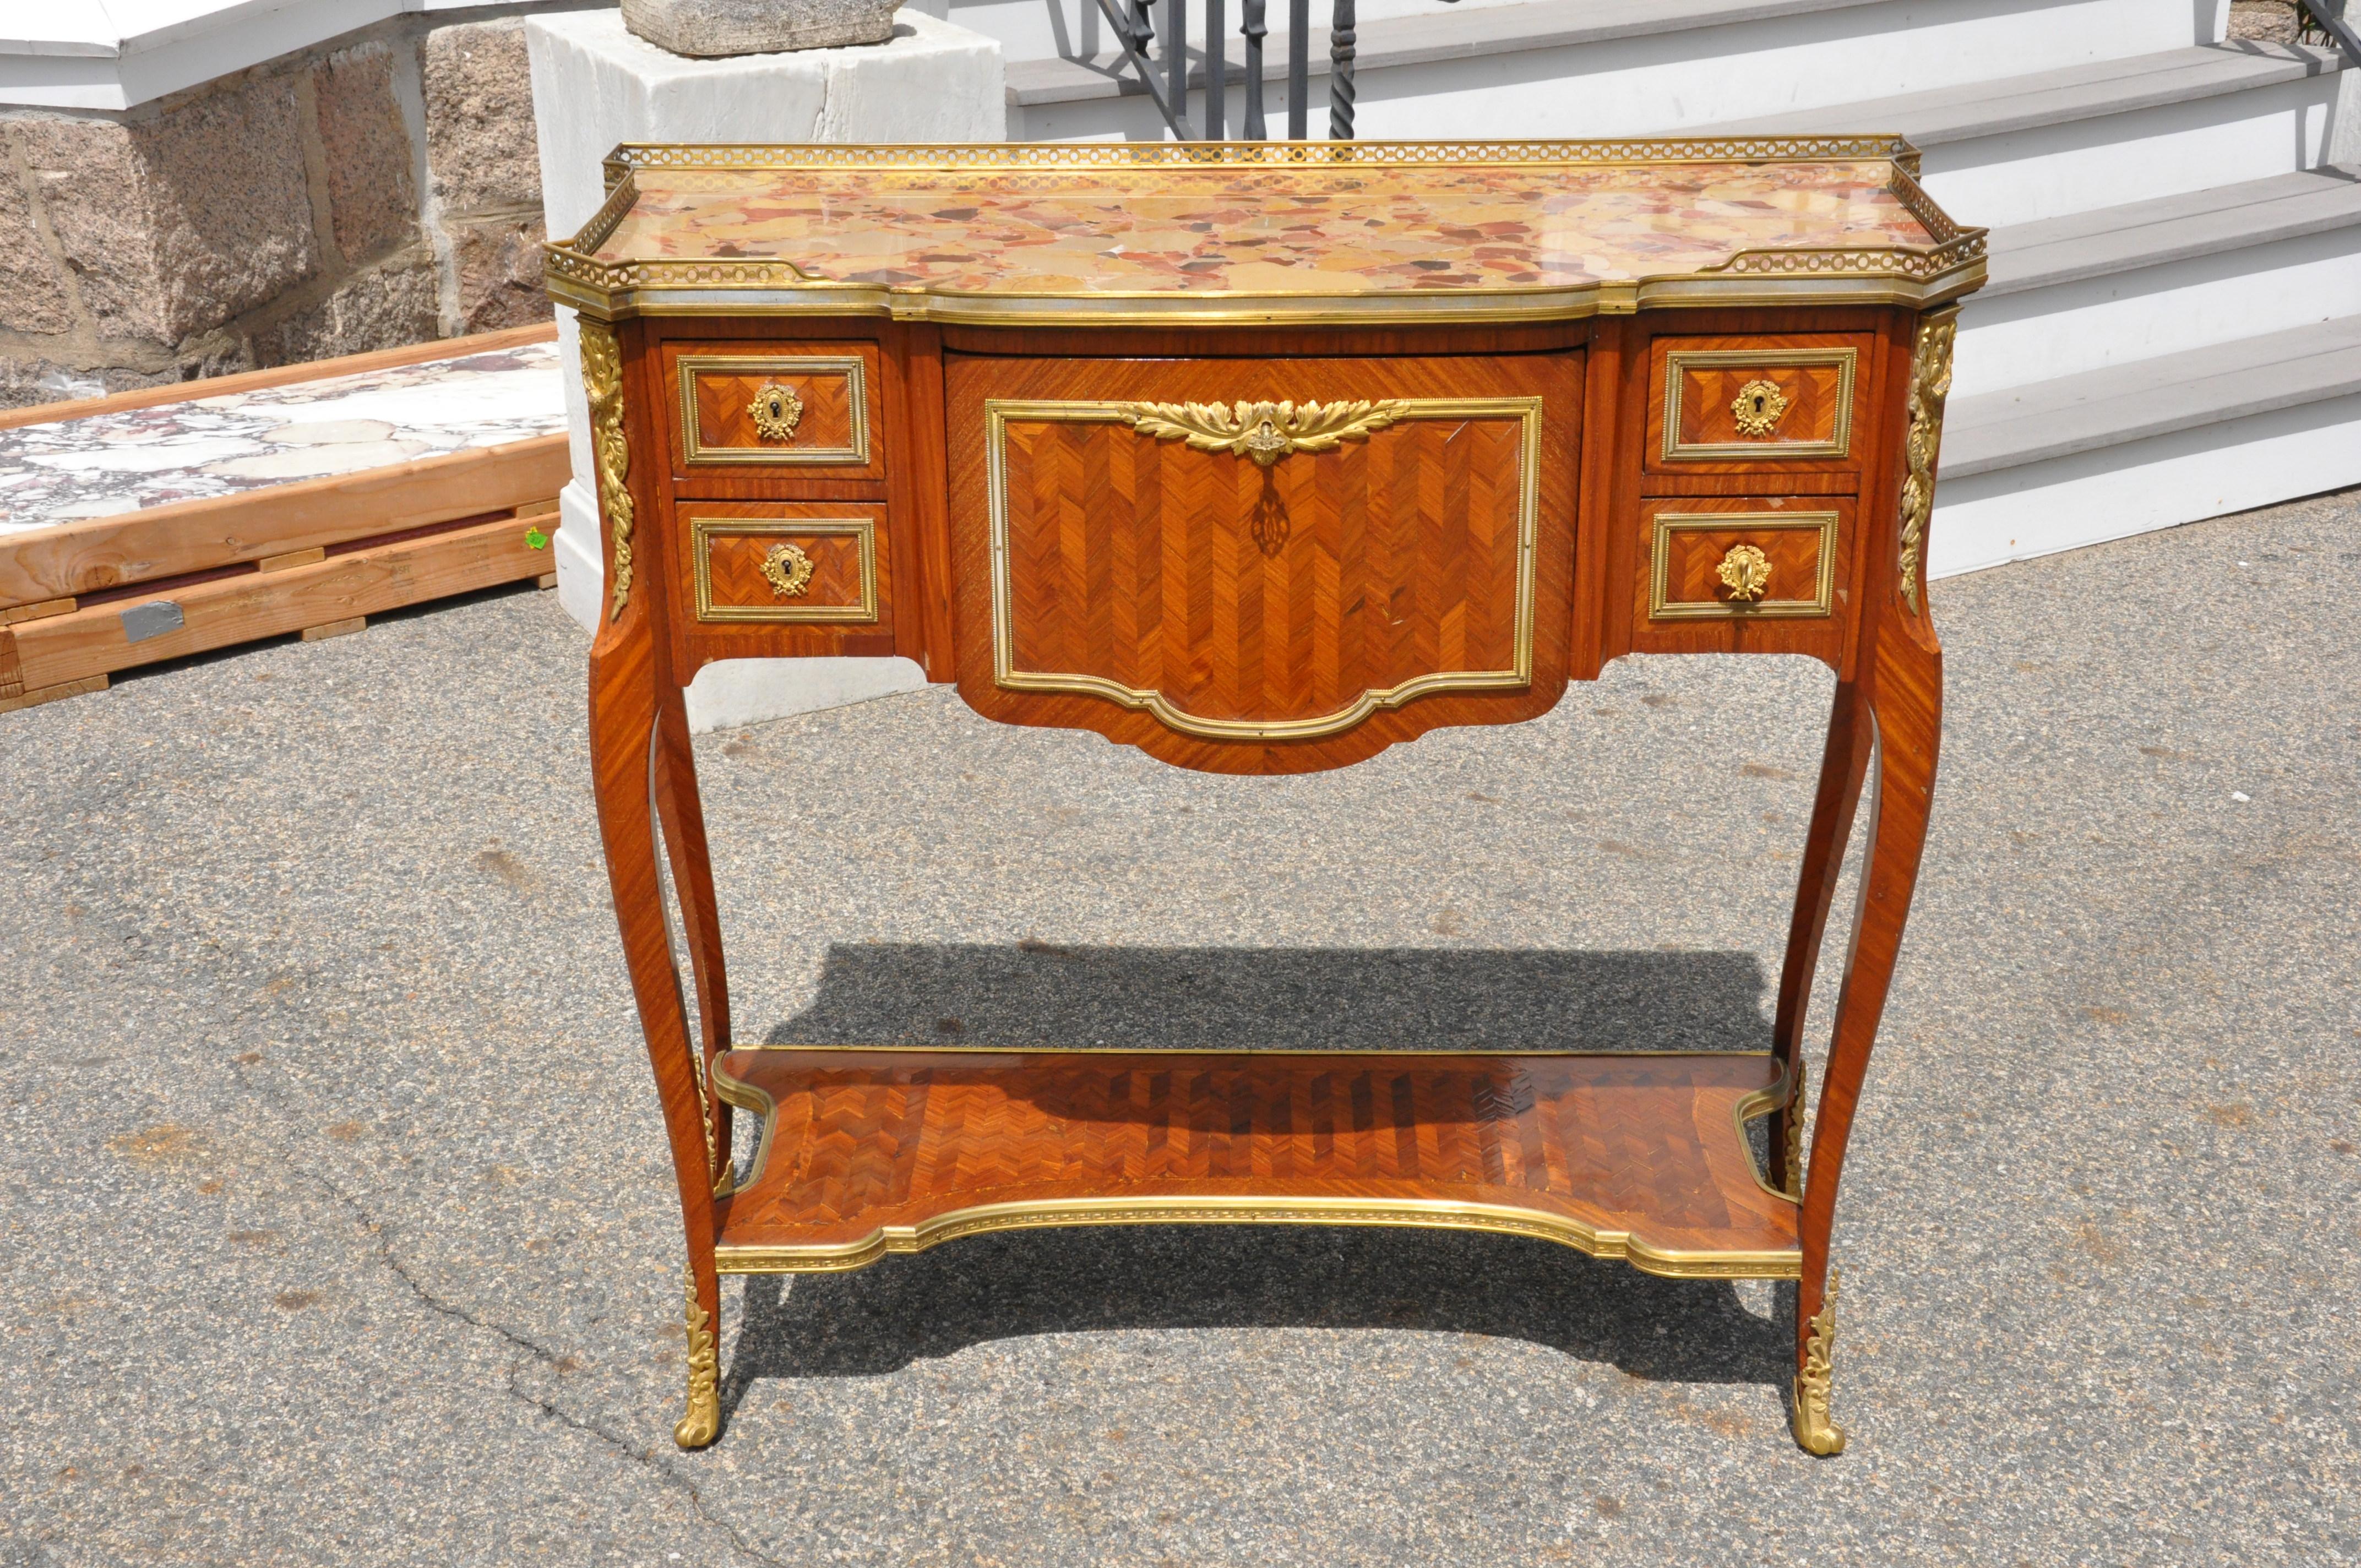 19th Century French Inlaid Kingwood Serving Table In Good Condition For Sale In Essex, MA